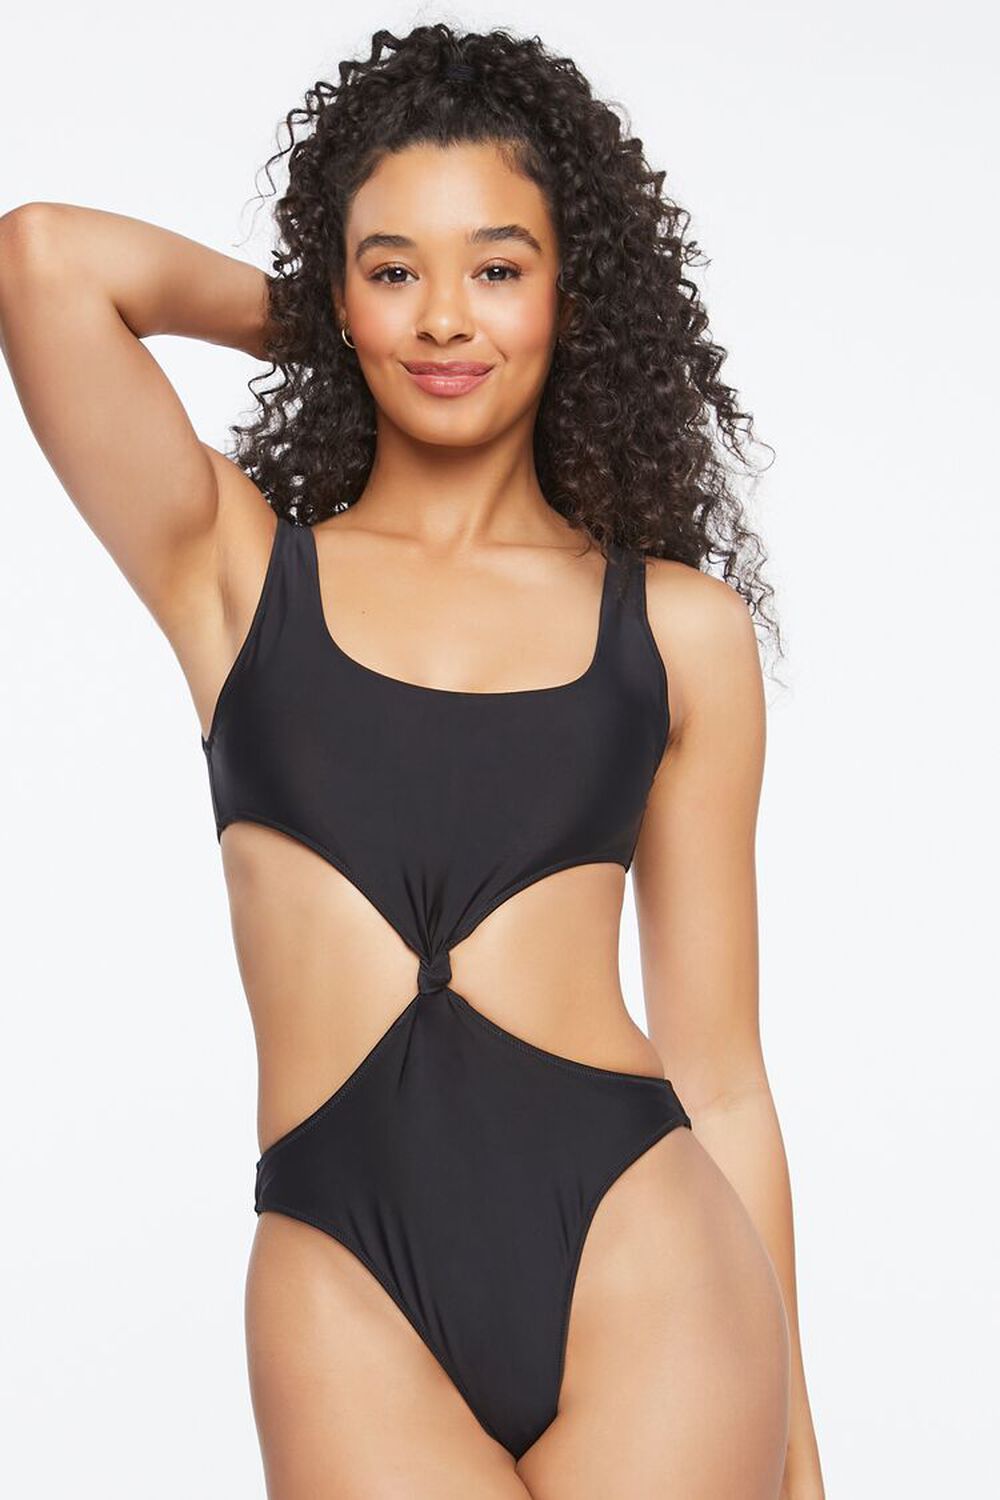 BLACK Knotted Monokini One-Piece Swimsuit, image 1